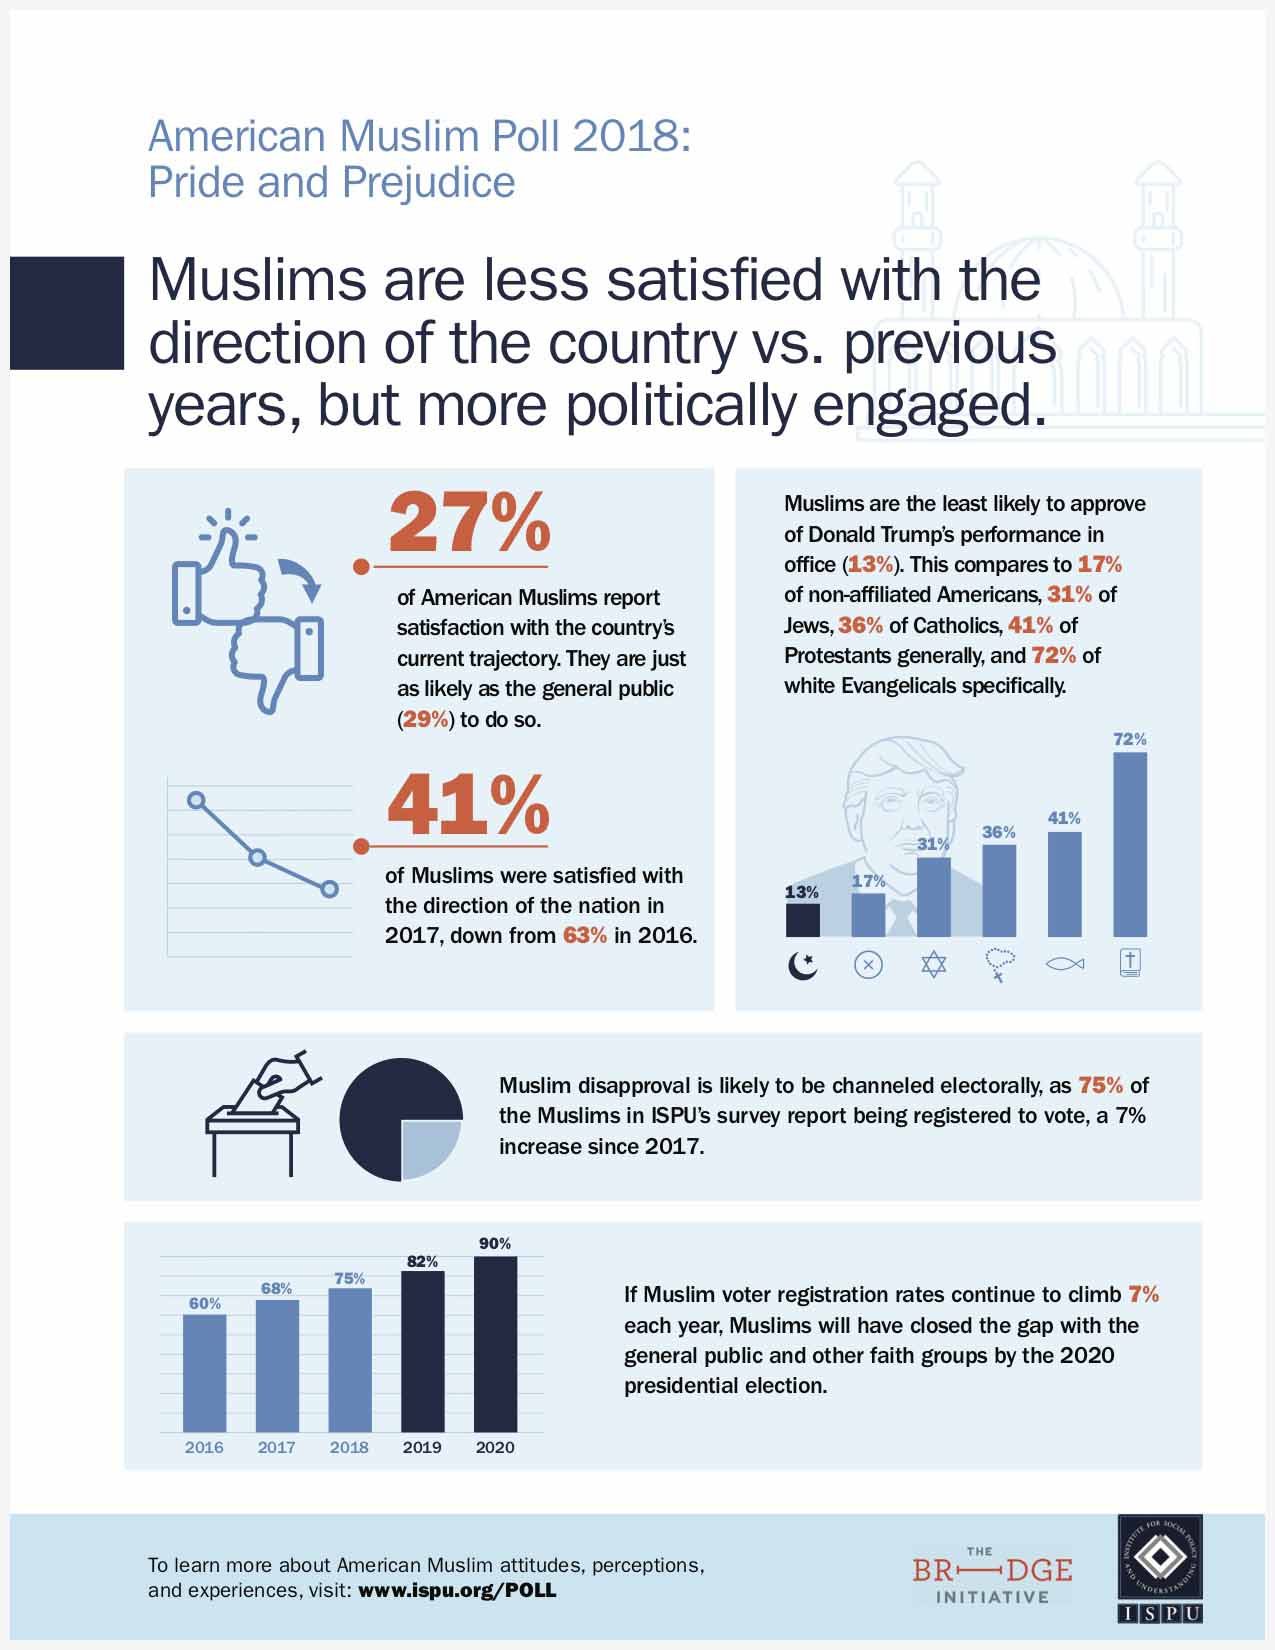 Muslims are less satisfied with the direction of the country vs previous years, but more politically engaged graphic